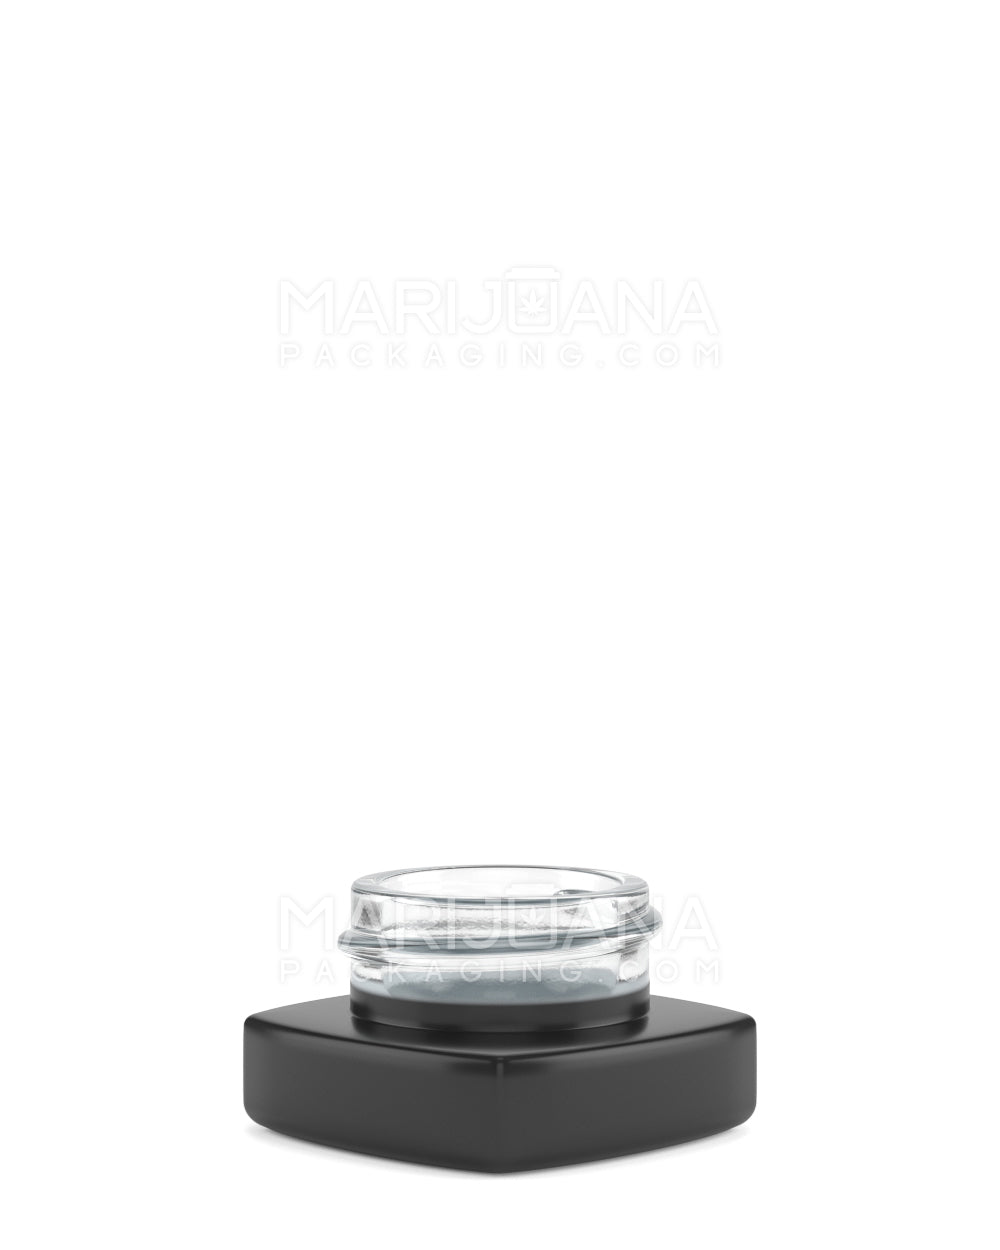 Matte Black Glass Pillow Concentrate Jar w/ White Interior | 32mm - 5mL | Sample